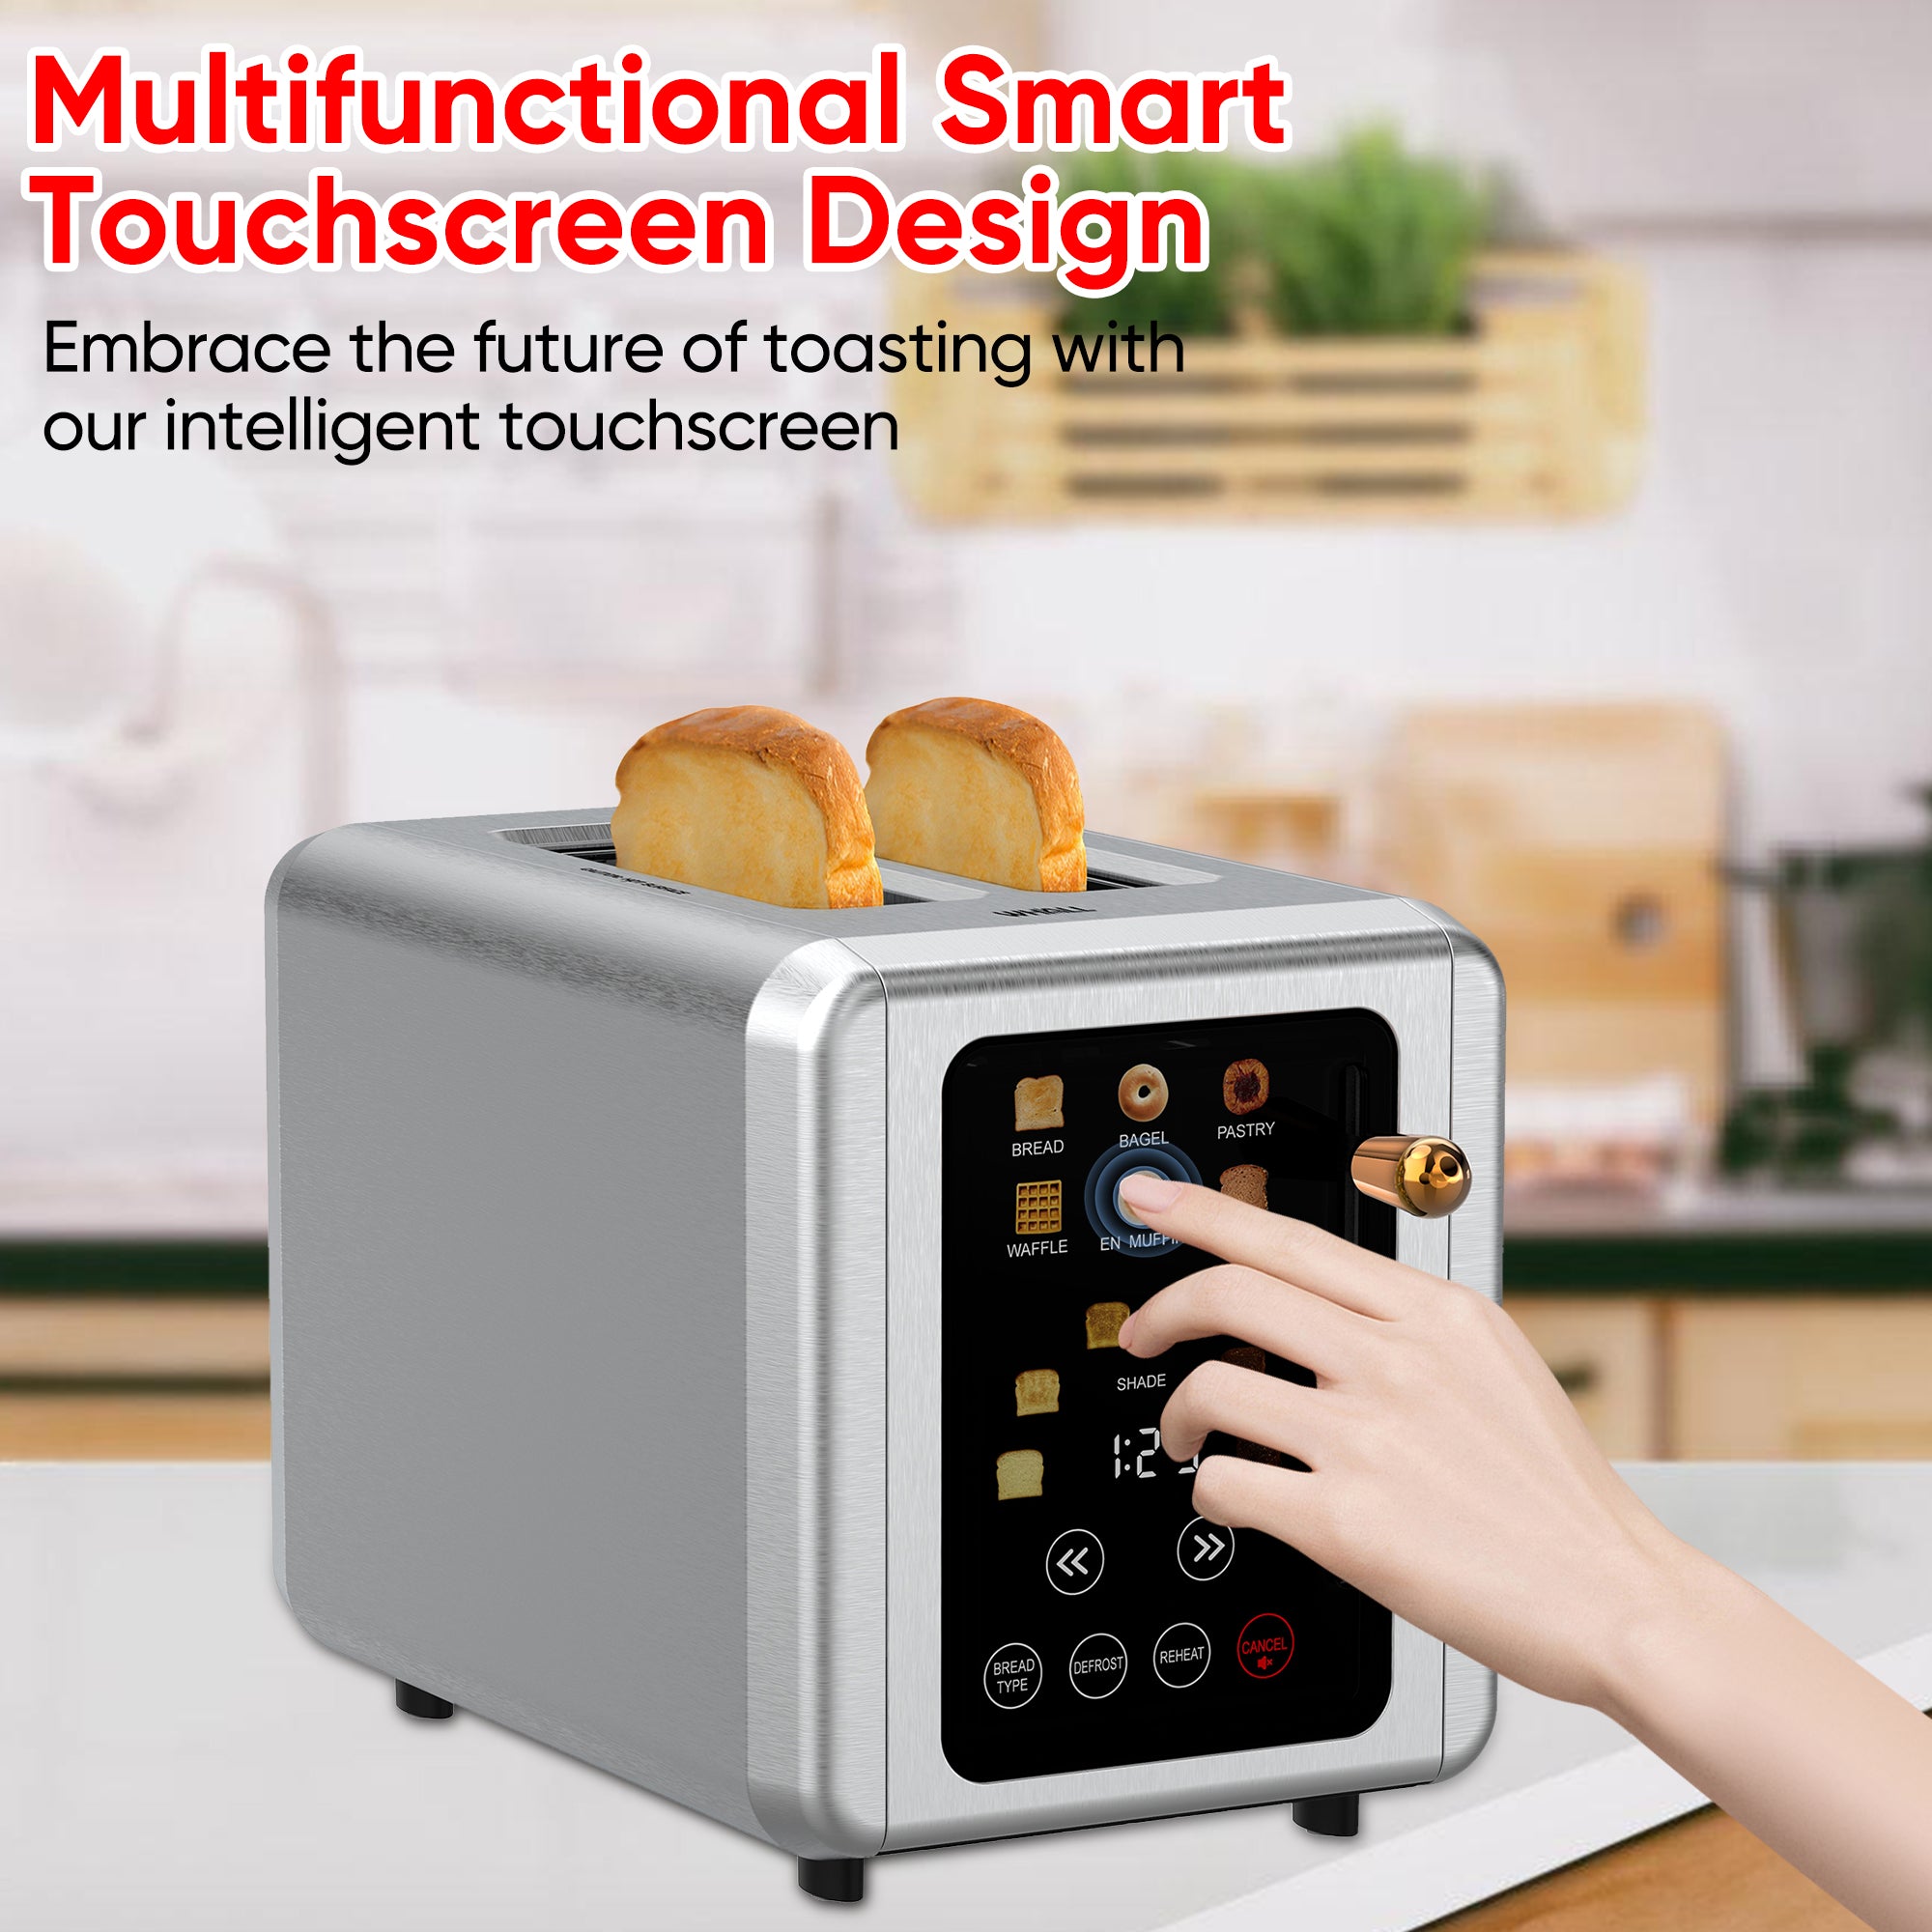 WHALL® 2 Slice Touch Screen Toaster - Stainless Steel Toaster with Wide Slot, 6 Shade Settings, Bagel Function, Removable Crumb Tray